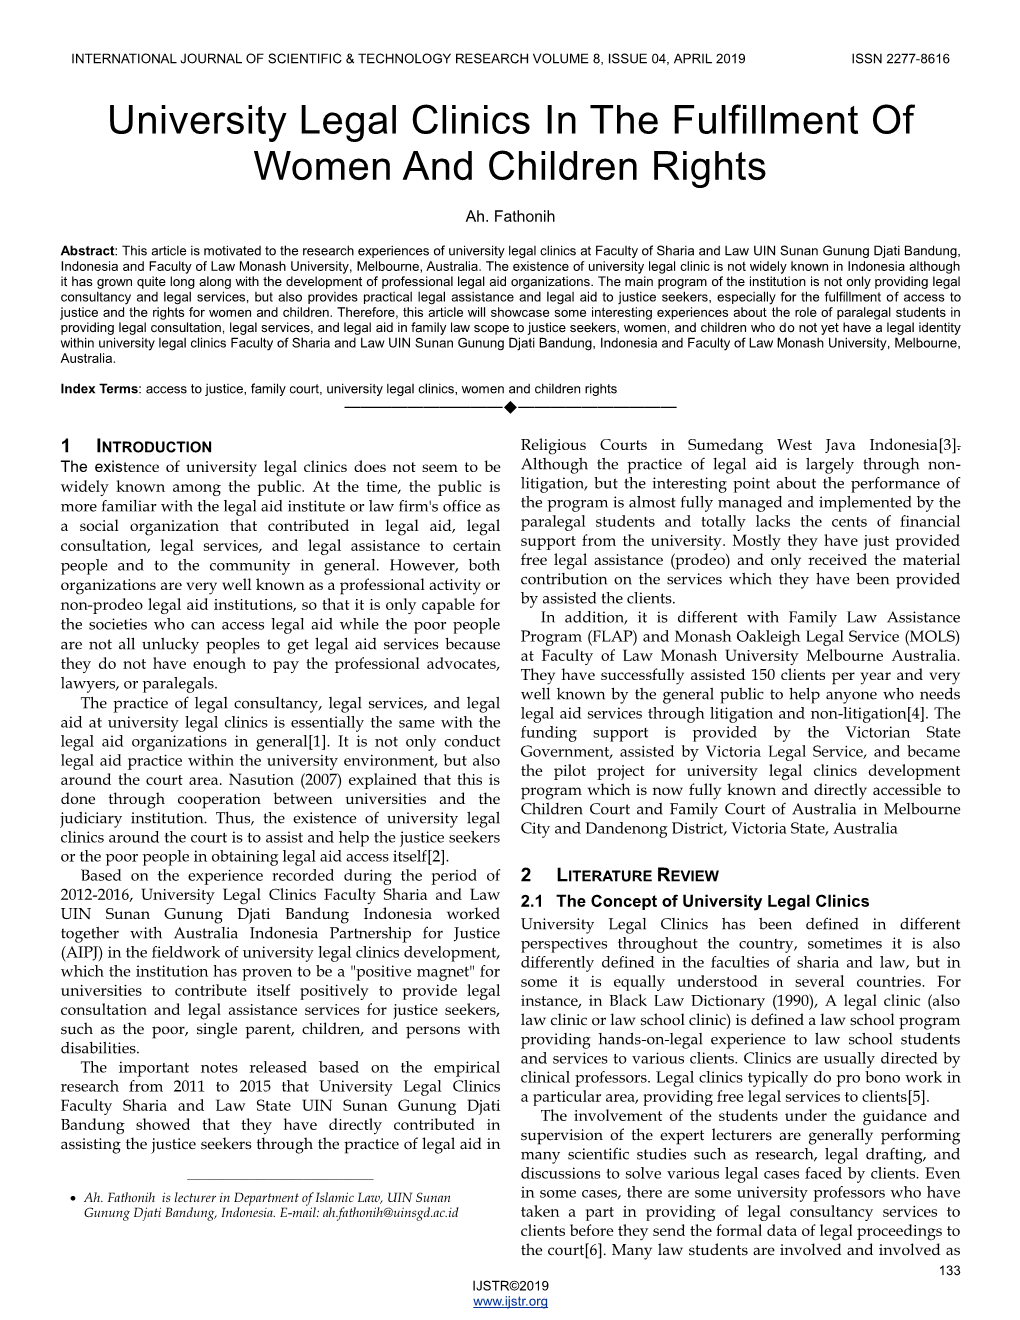 University Legal Clinics in the Fulfillment of Women and Children Rights